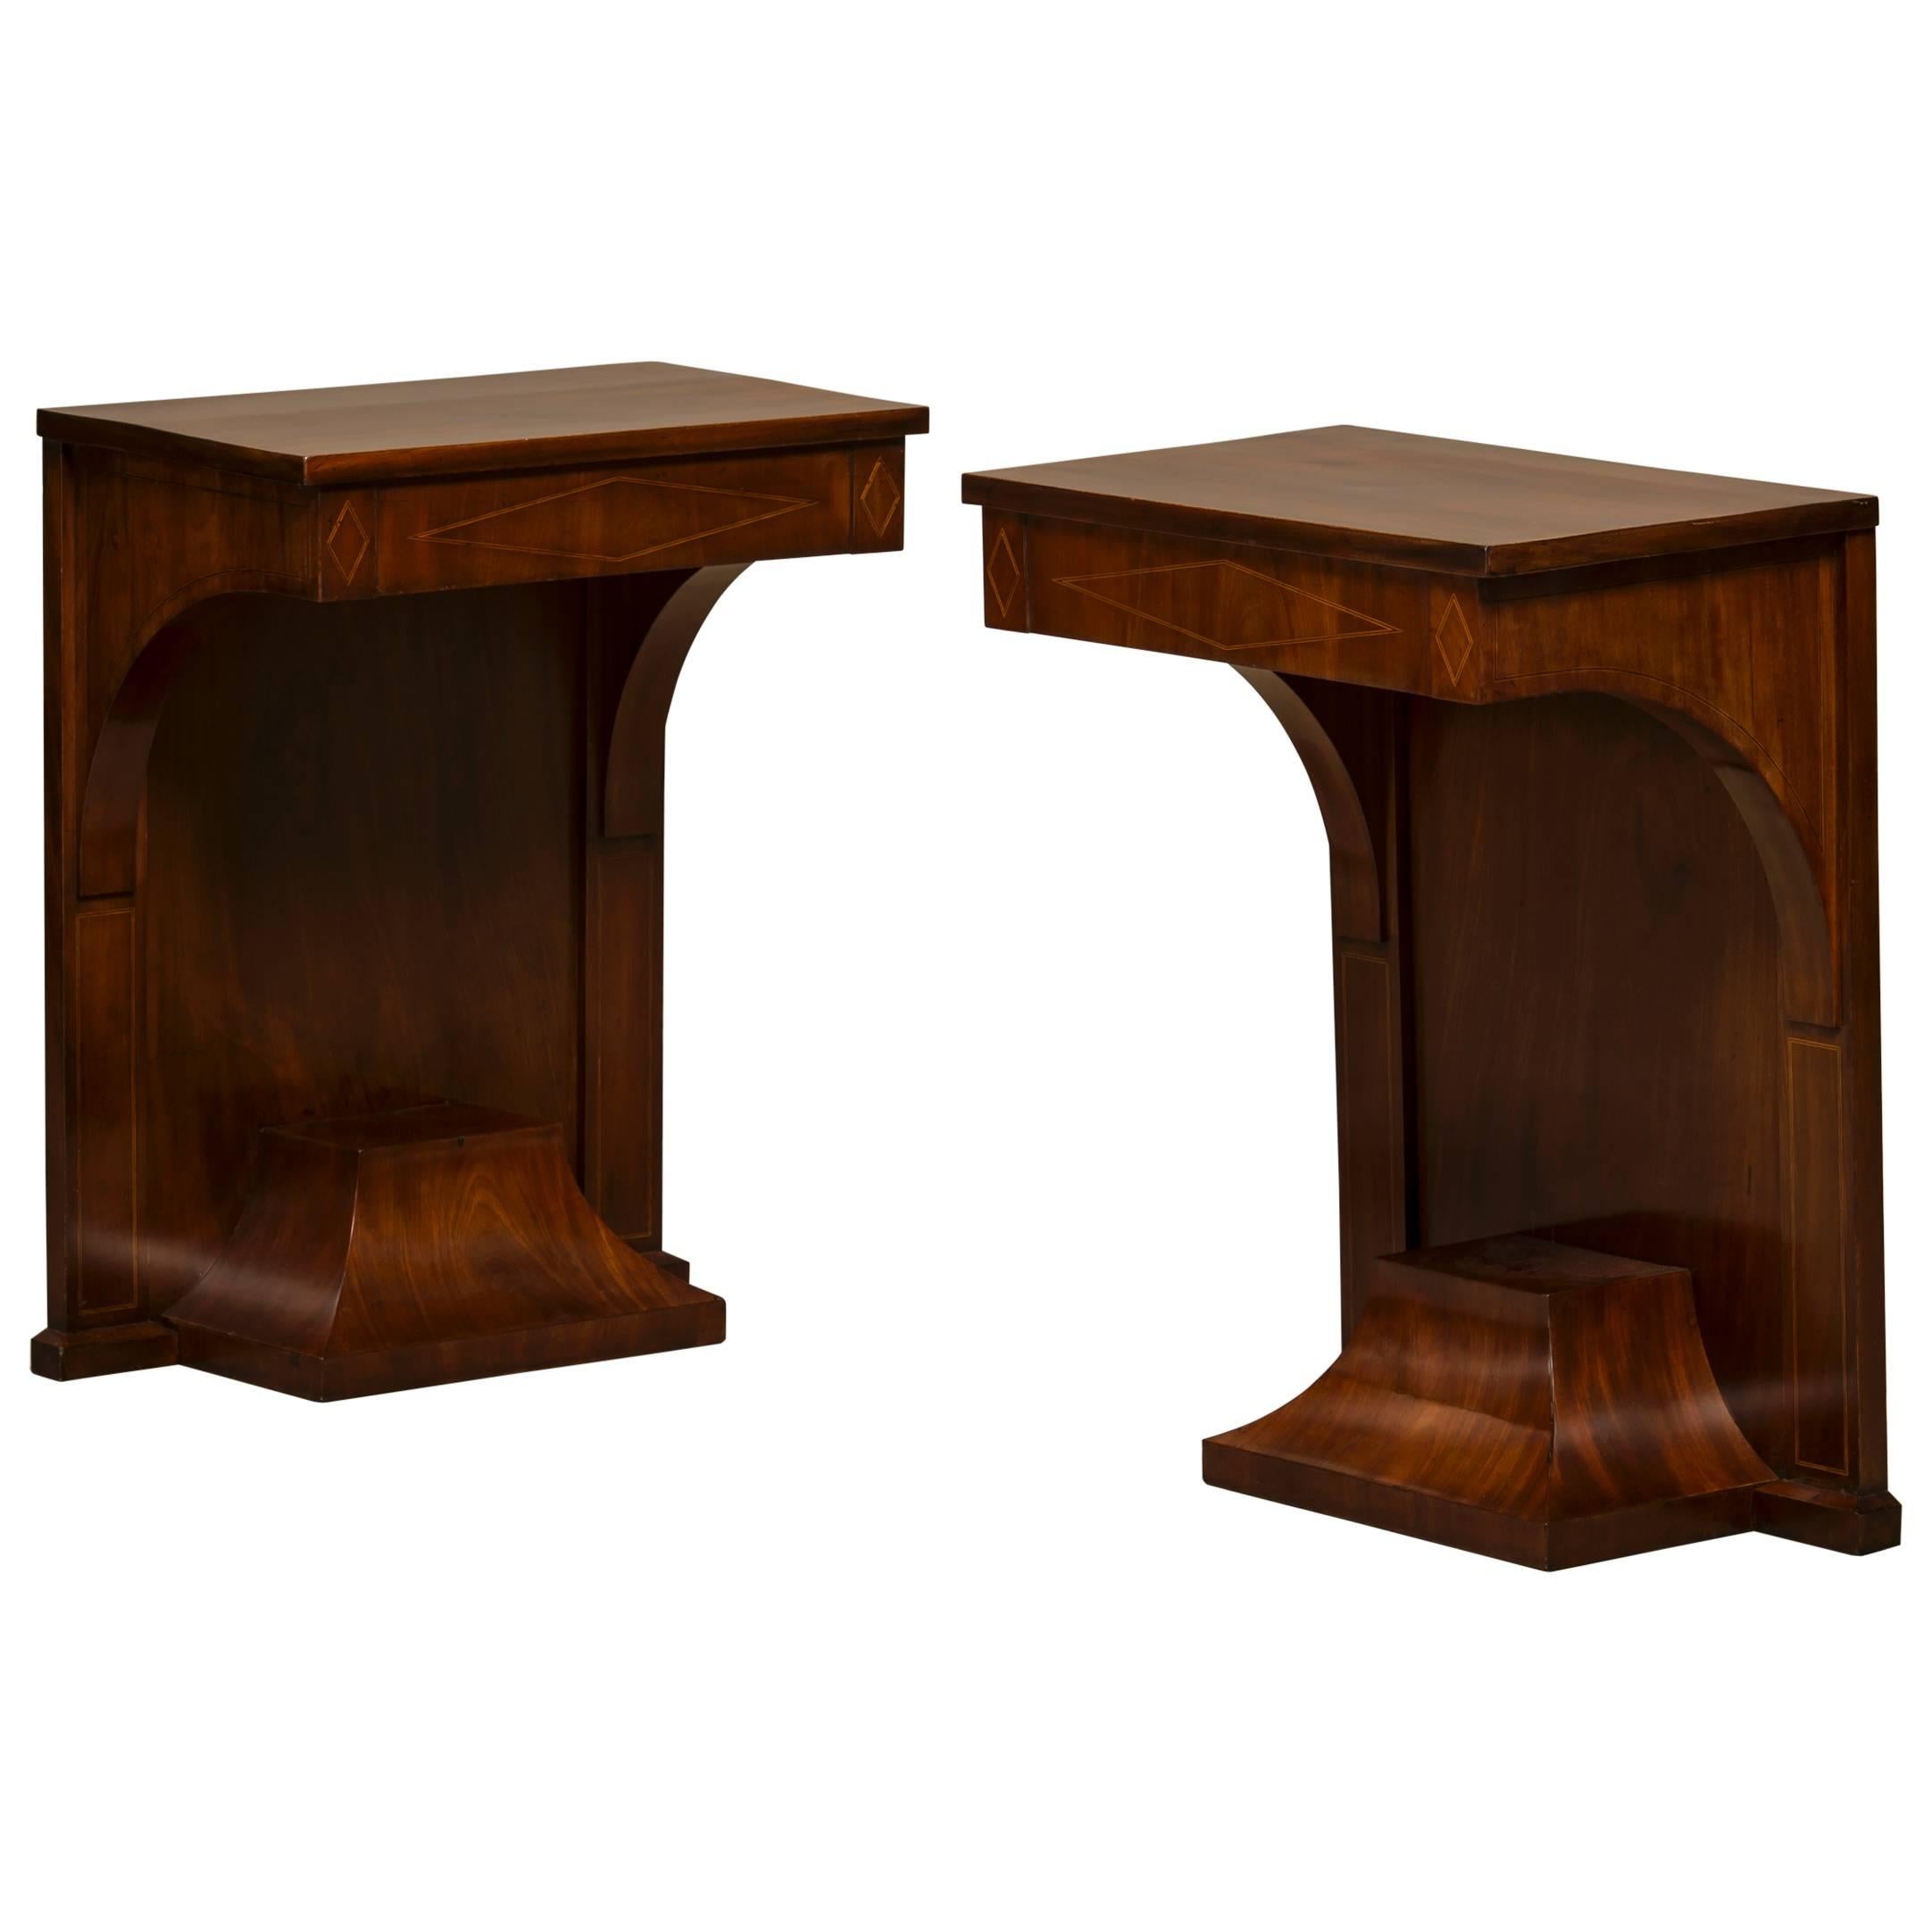 Empire Console Tables Made of Cuban Mahogany with Inlays in Light Wood